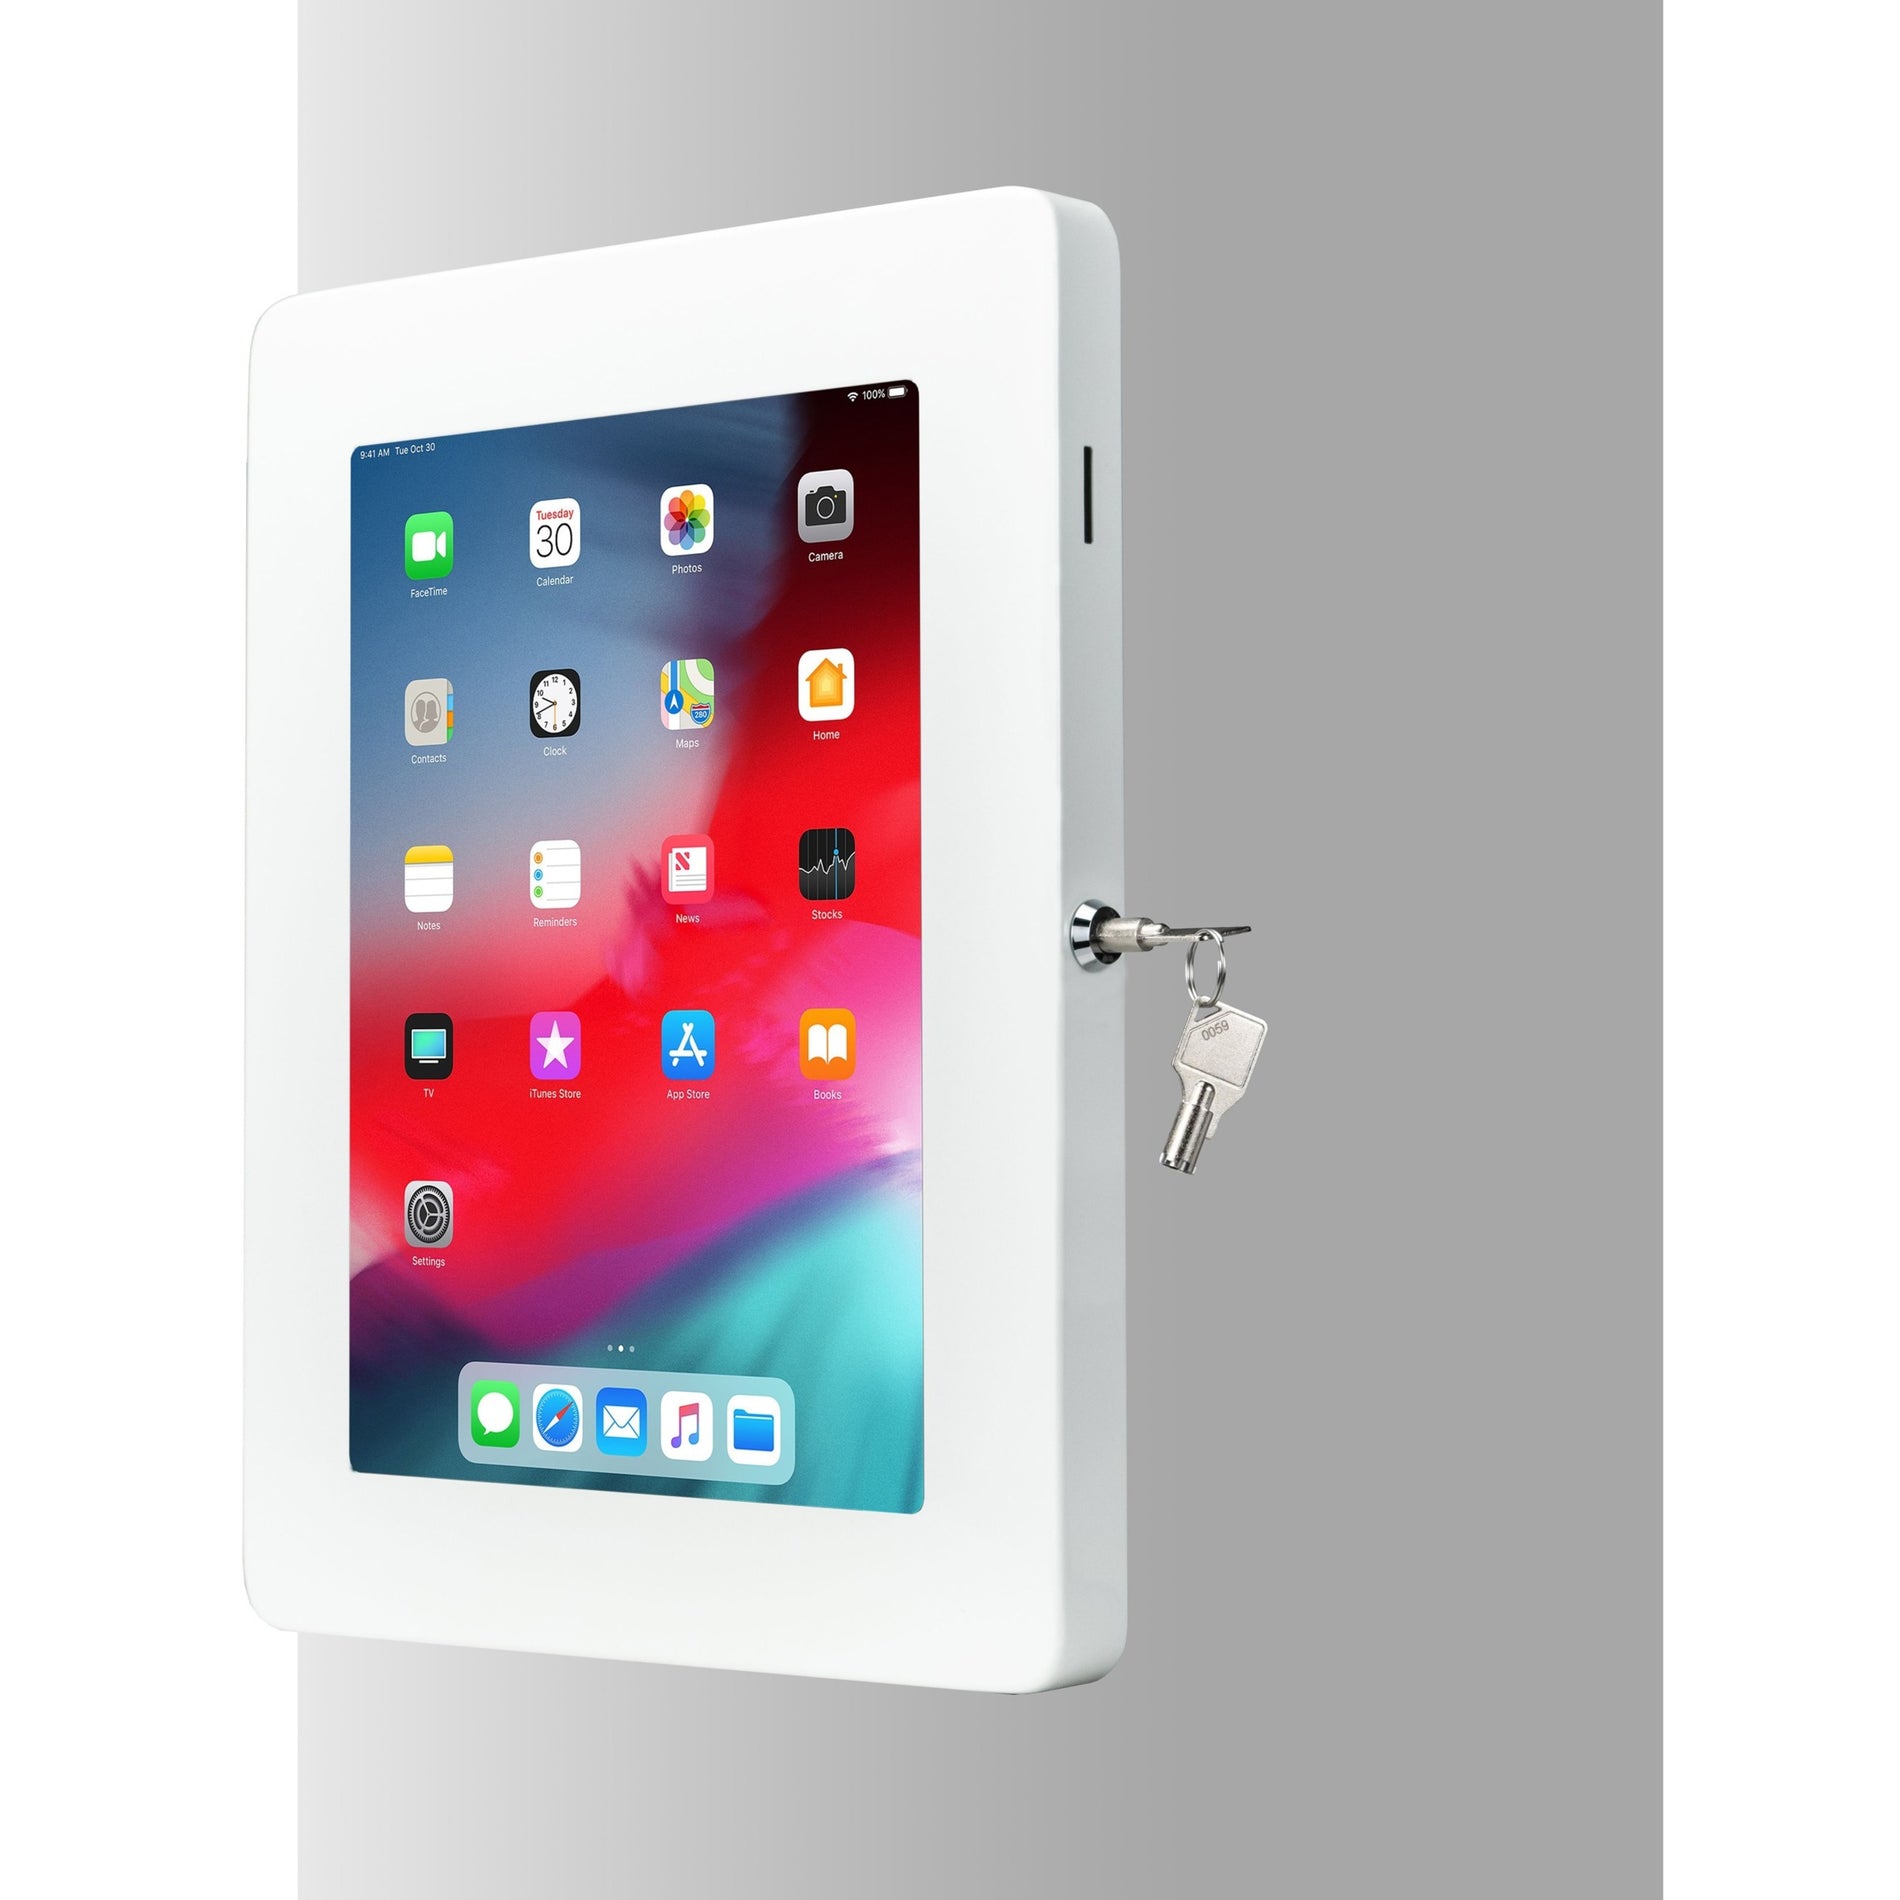 CTA Digital PAD-PLWW Premium Large Locking Wall Mount (White), Cable Management, Heavy Duty, Theft Resistant, Durable